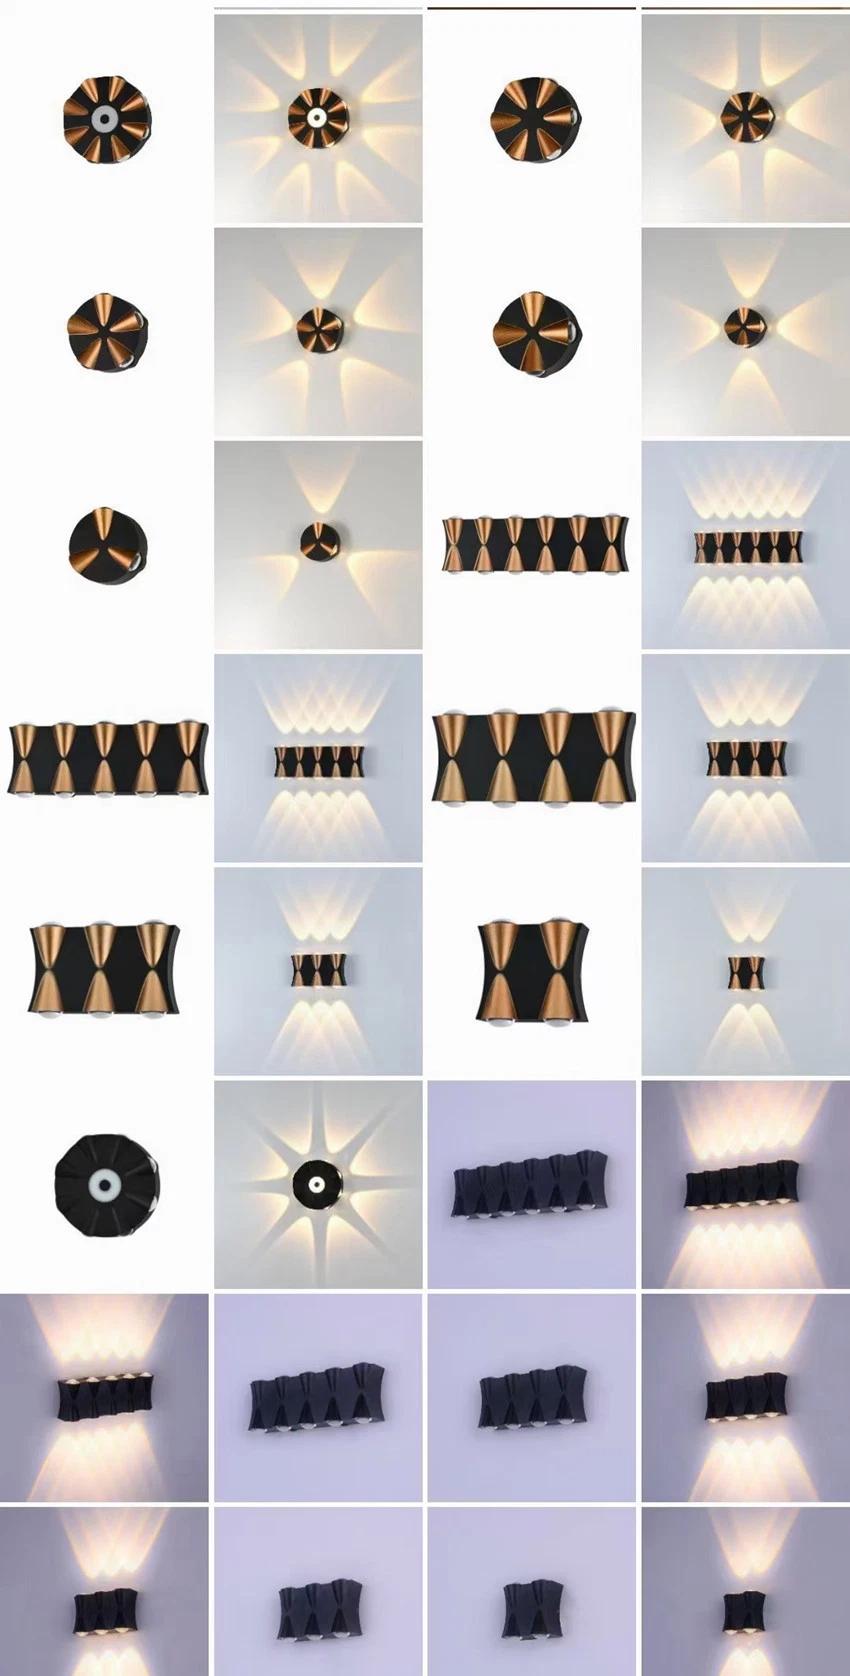 8W up Down White Black Modern Outdoor Indoor LED Wall Light for Home Stairs Bathroom Light